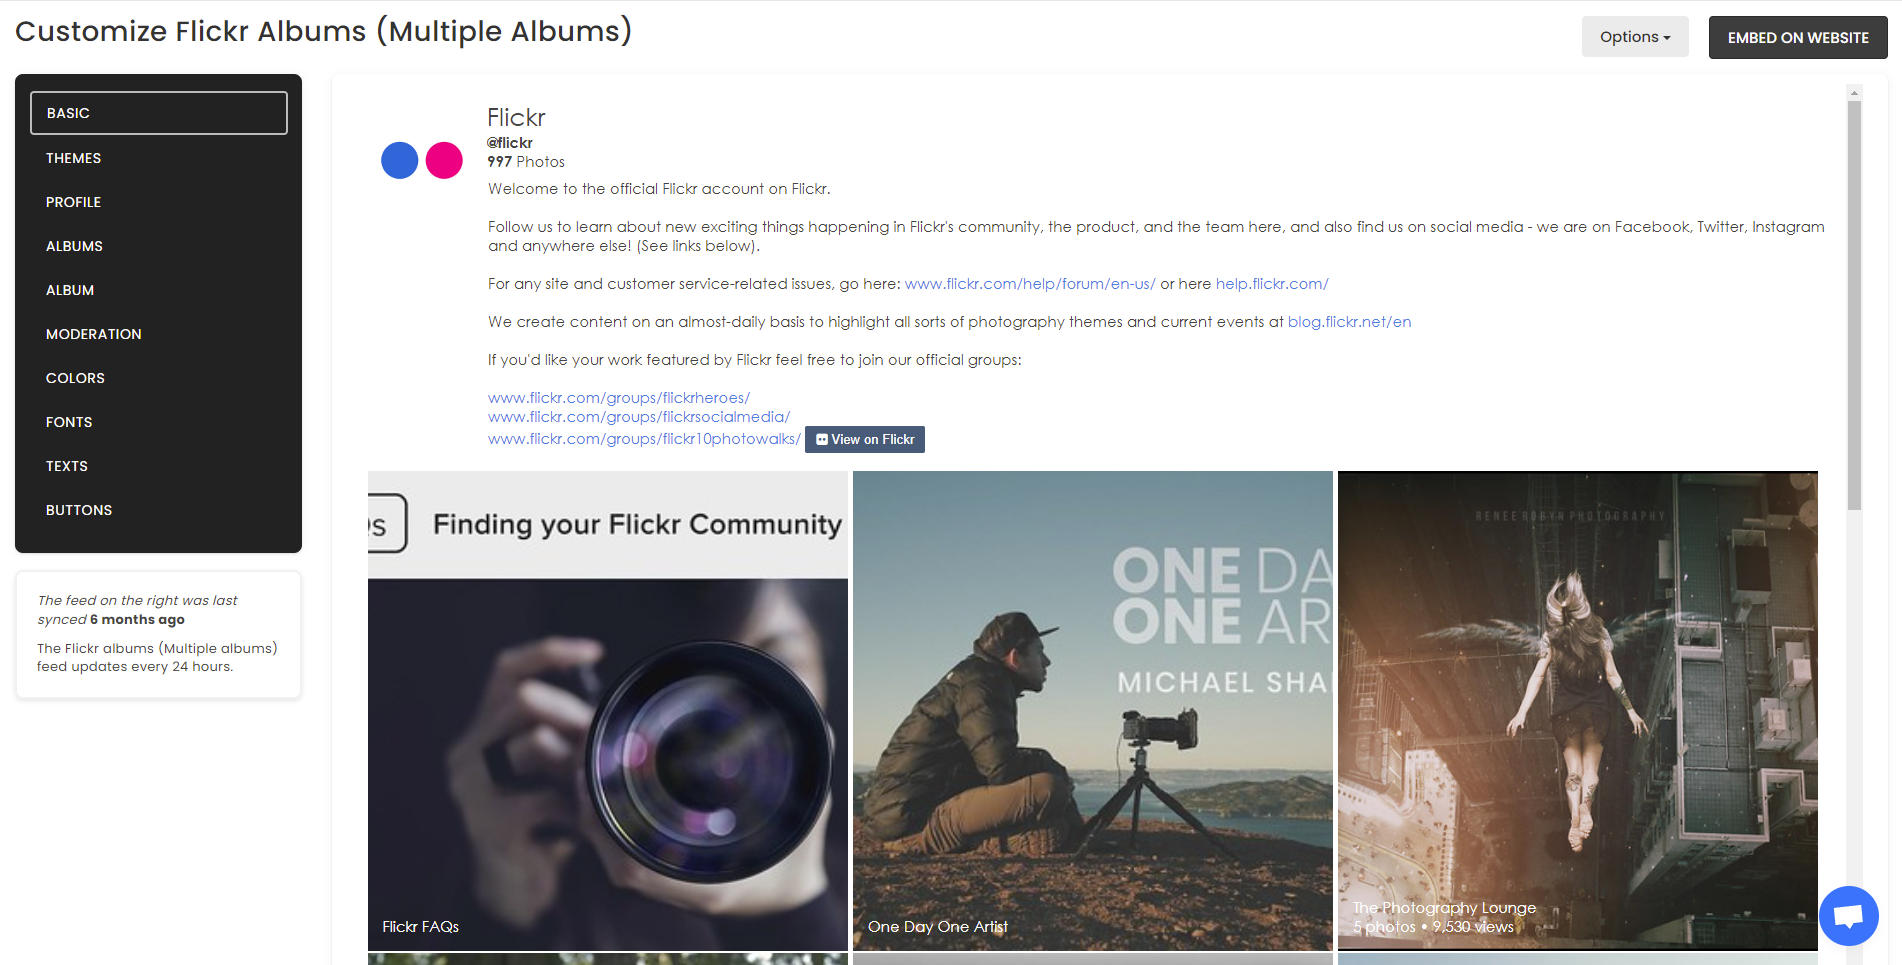 Customize your feed - How To Embed Flickr Albums (Multiple Albums) On Wordpress Website For Free?